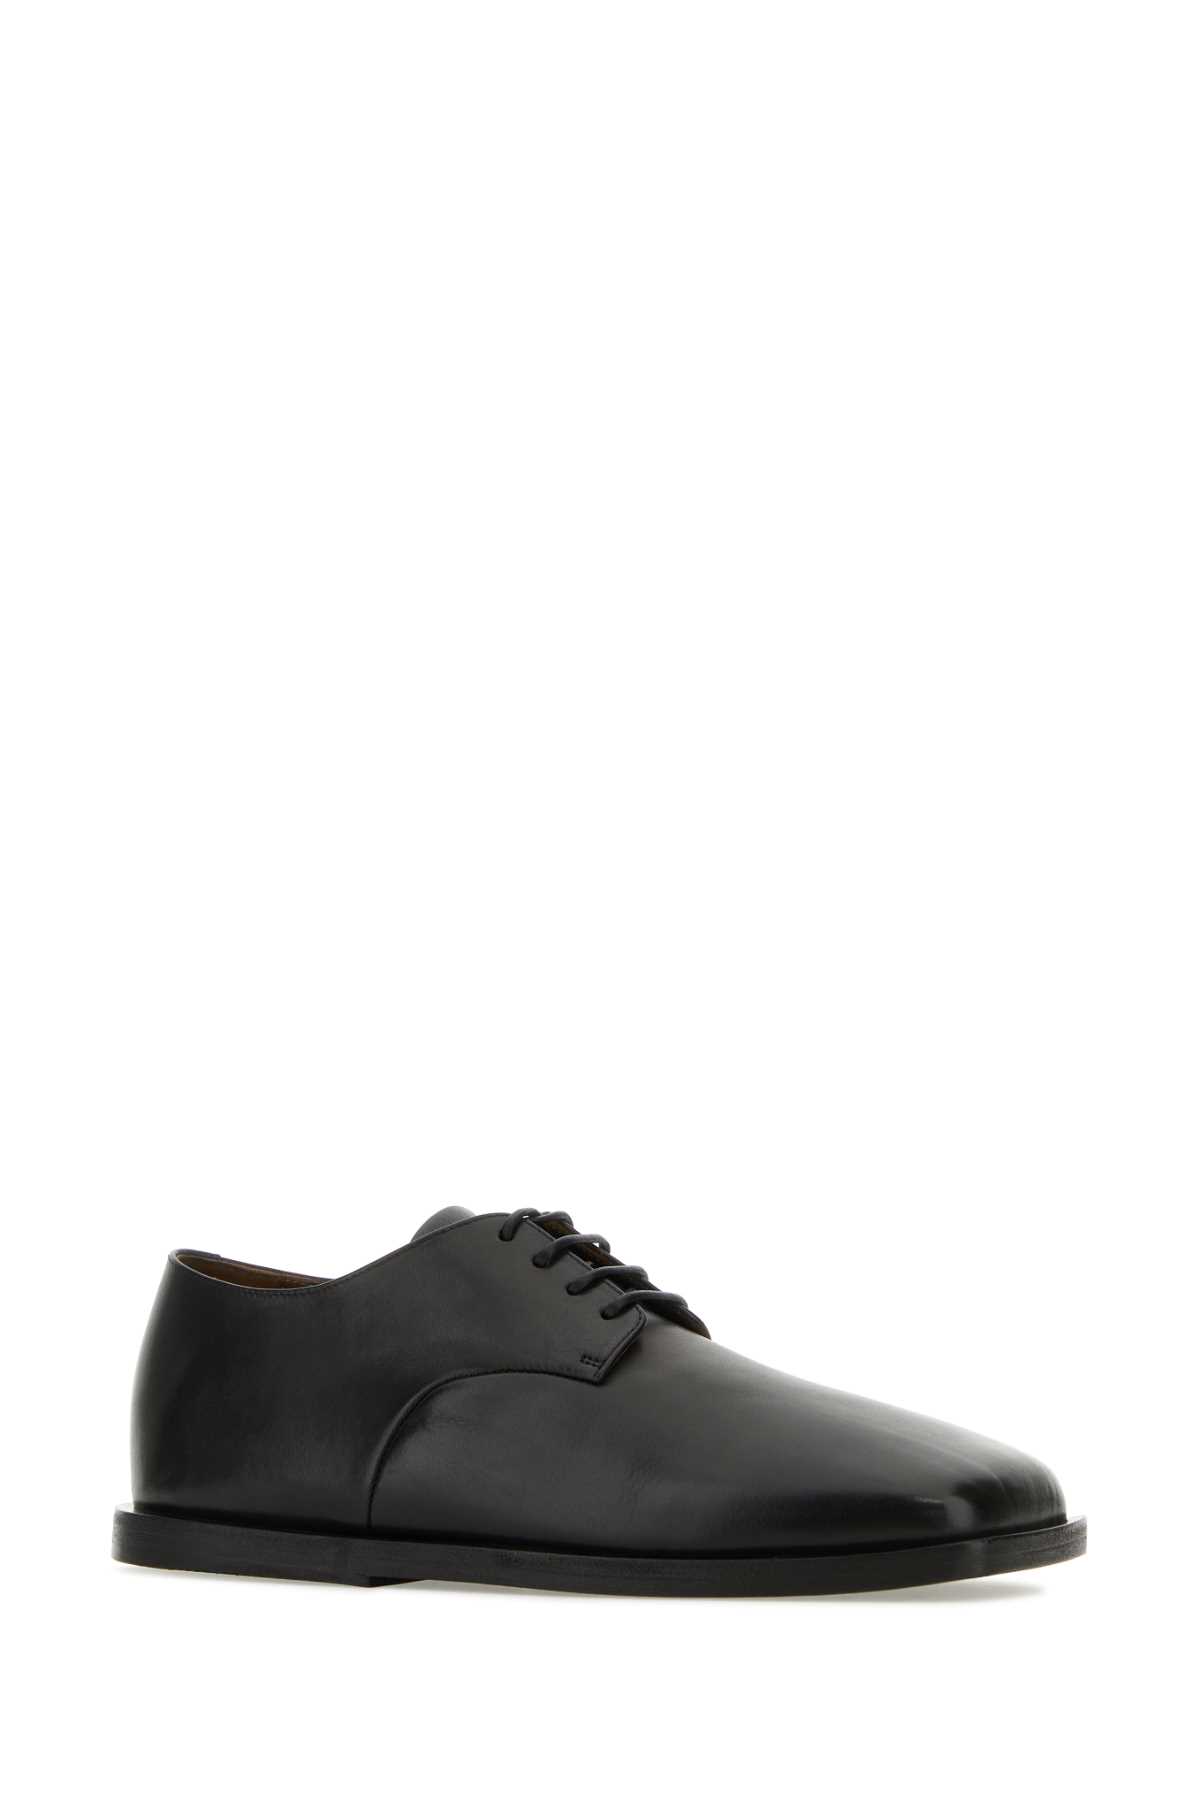 MARSÈLL BLACK LEATHER LACE-UP SHOES